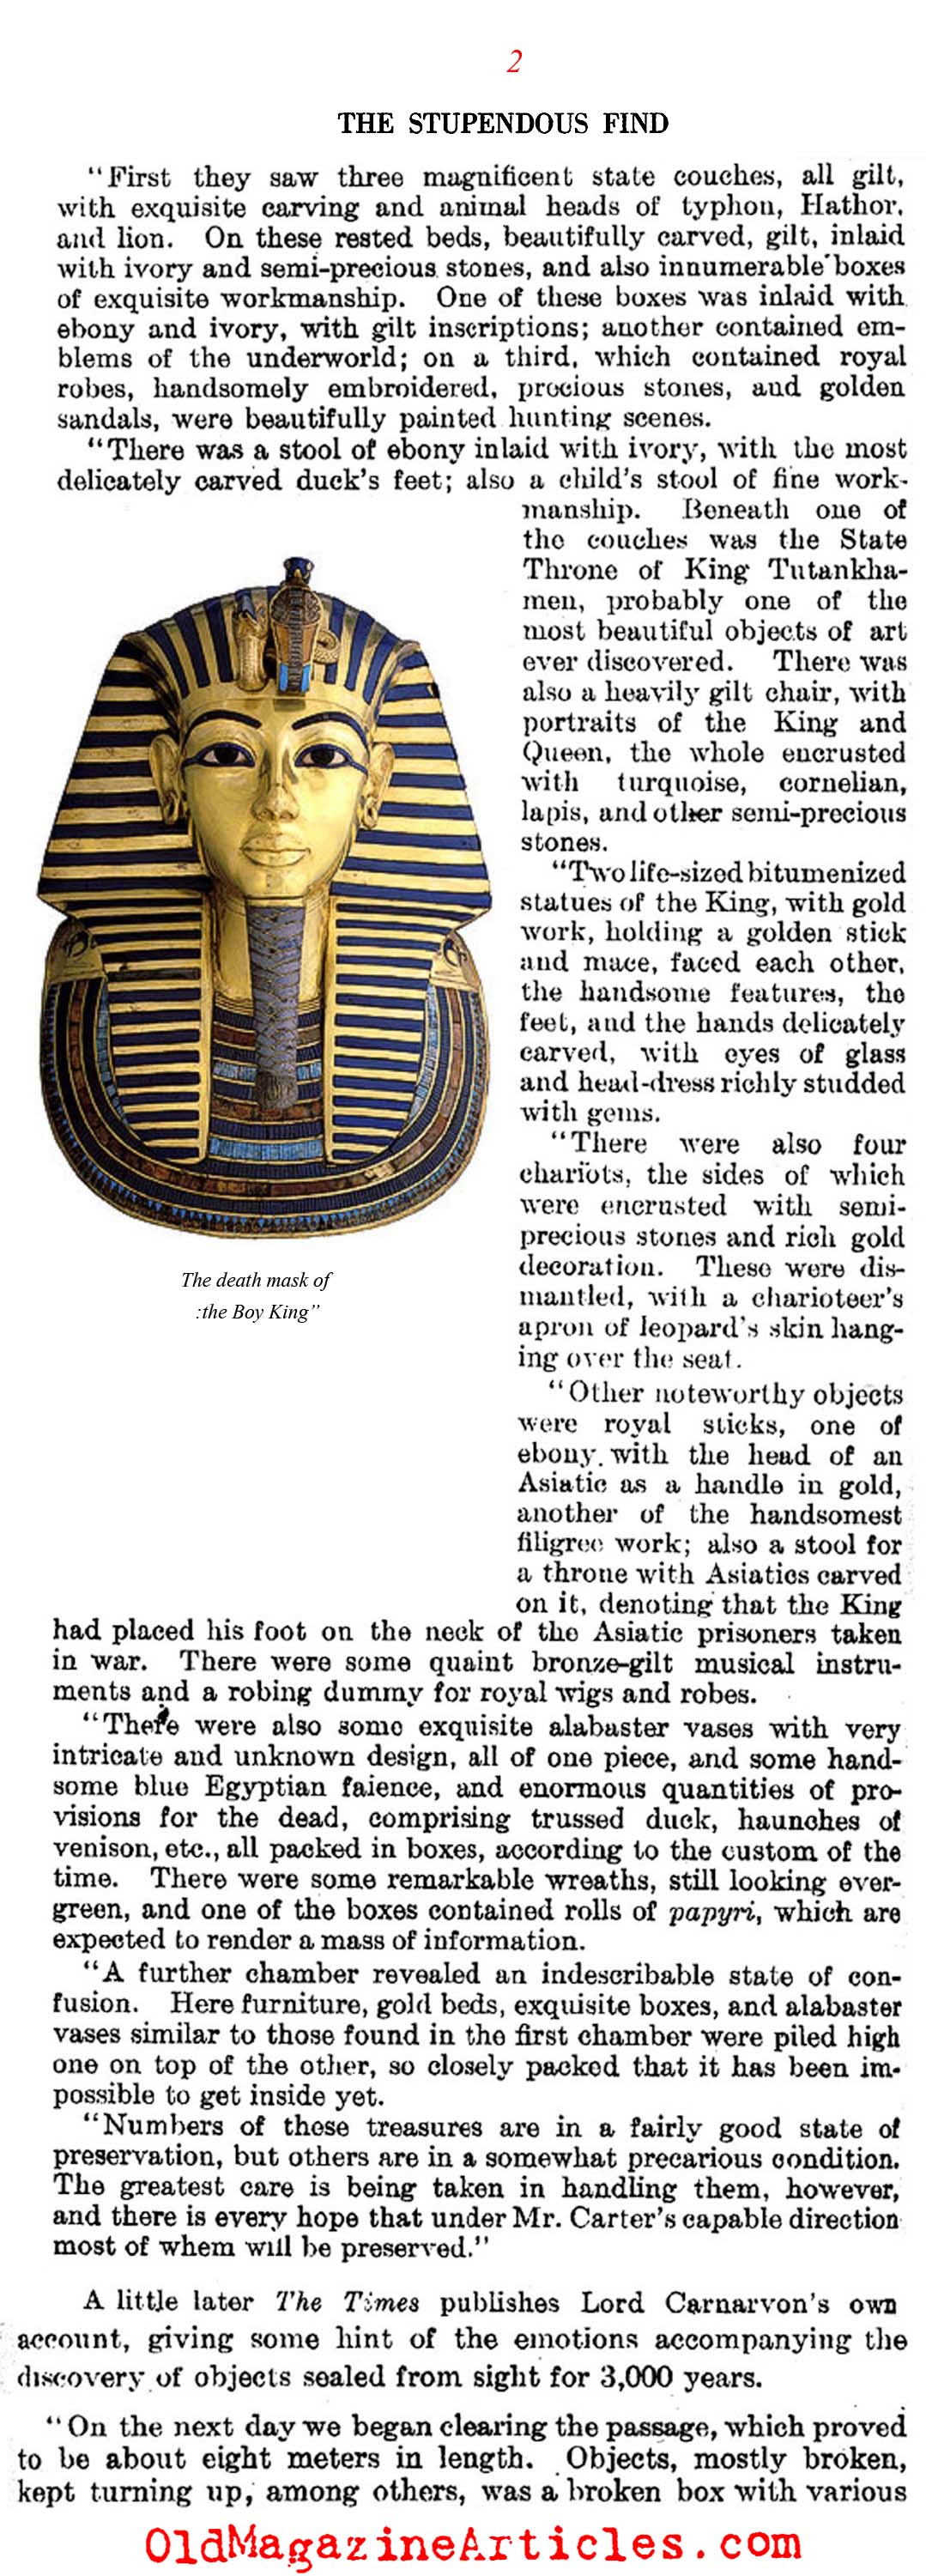 Discovered: The Tomb of King Tutankhamun (Literary Digest, 1923)